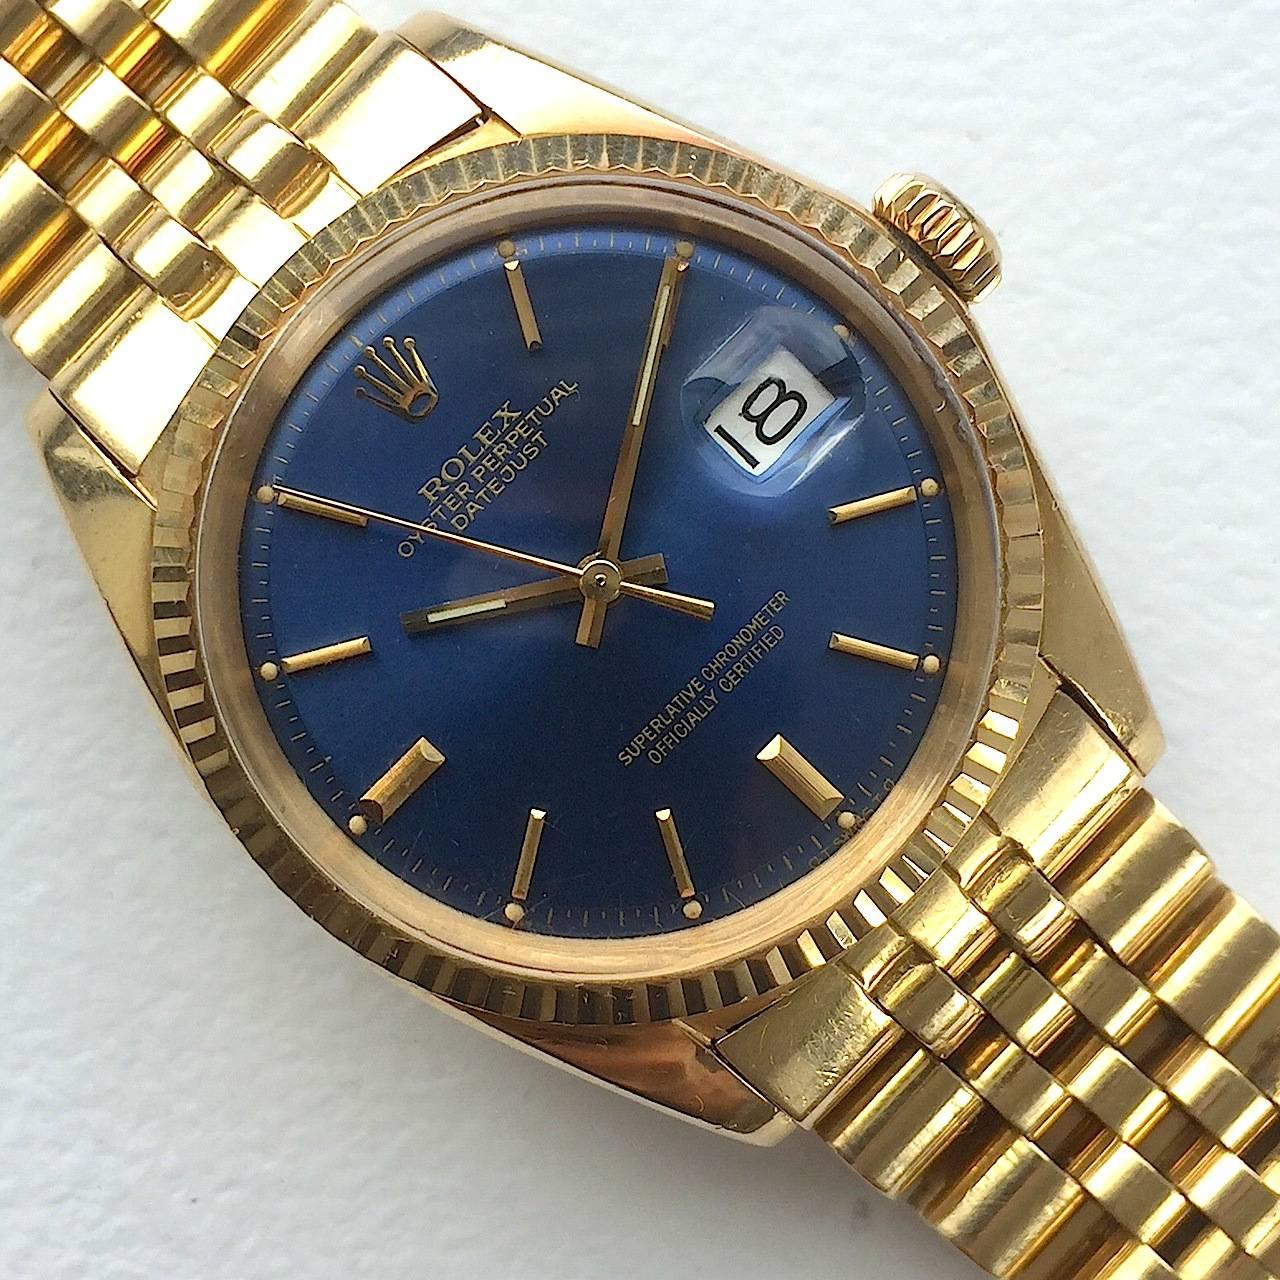 Rolex 18K Yellow Gold Oyster Perpetual Datejust Watch
Beautiful Factory Blue Sigma Dial with Applied Yellow Gold Hour Markers
Yellow Gold Gold Fluted Bezel
18K Yellow Gold Case
36mm in size 
Features Rolex Automatic Movement with Calibre 1500